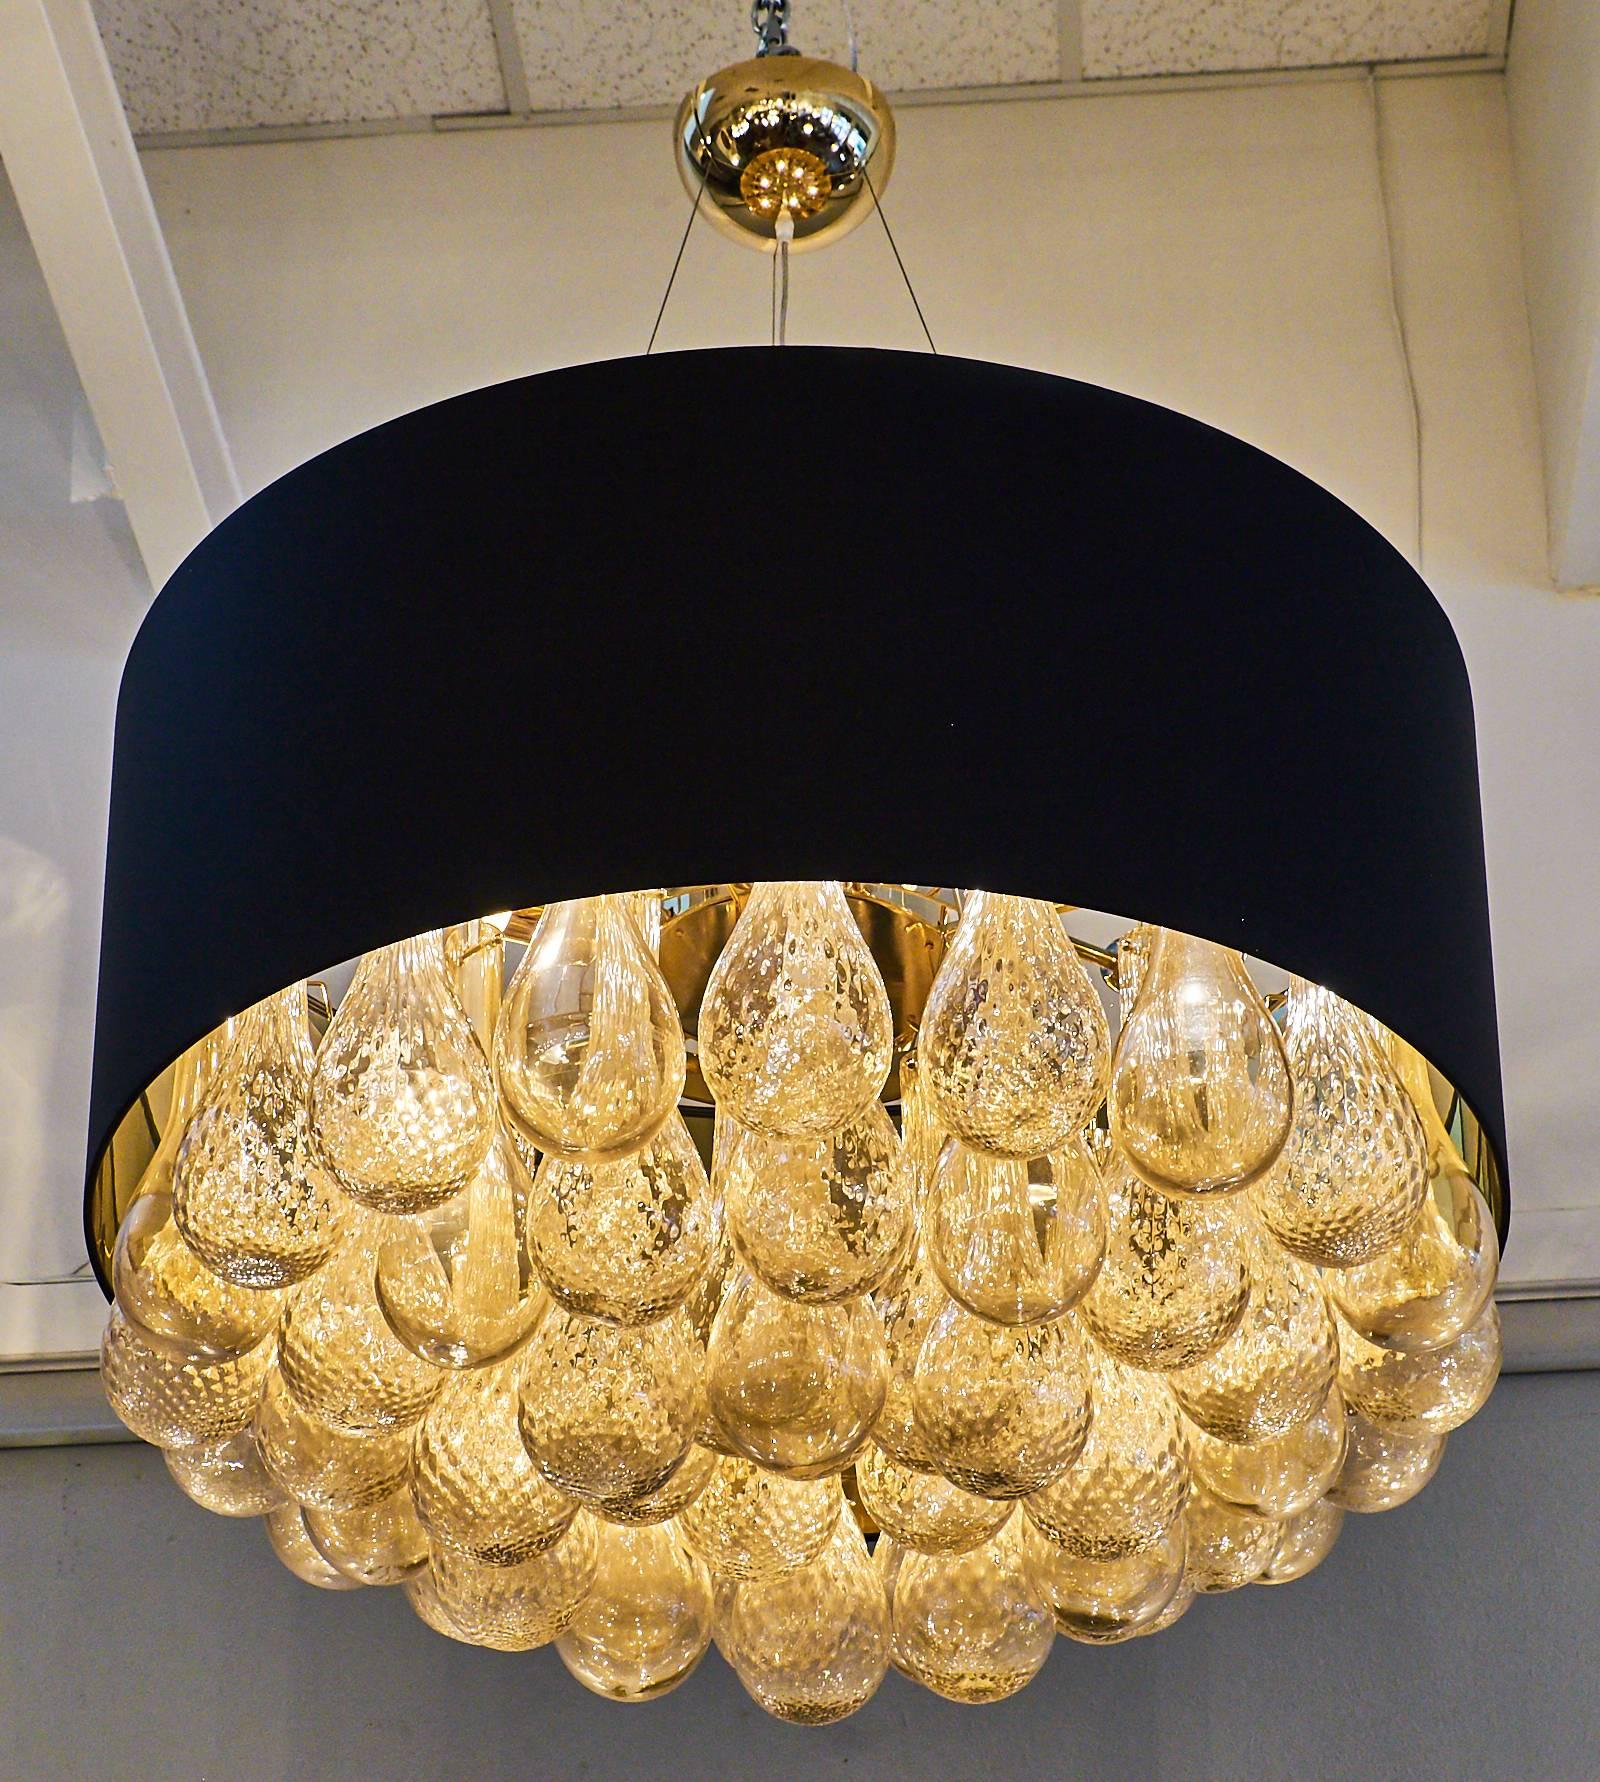 Dramatic black drum shade surrounding stunning gold “avventurina” Murano blown glass fused with 24-carats gold leaf. The glass drops differ between smooth and textured finishes. The light radiates off of the glass drops in lovely ways and the dark